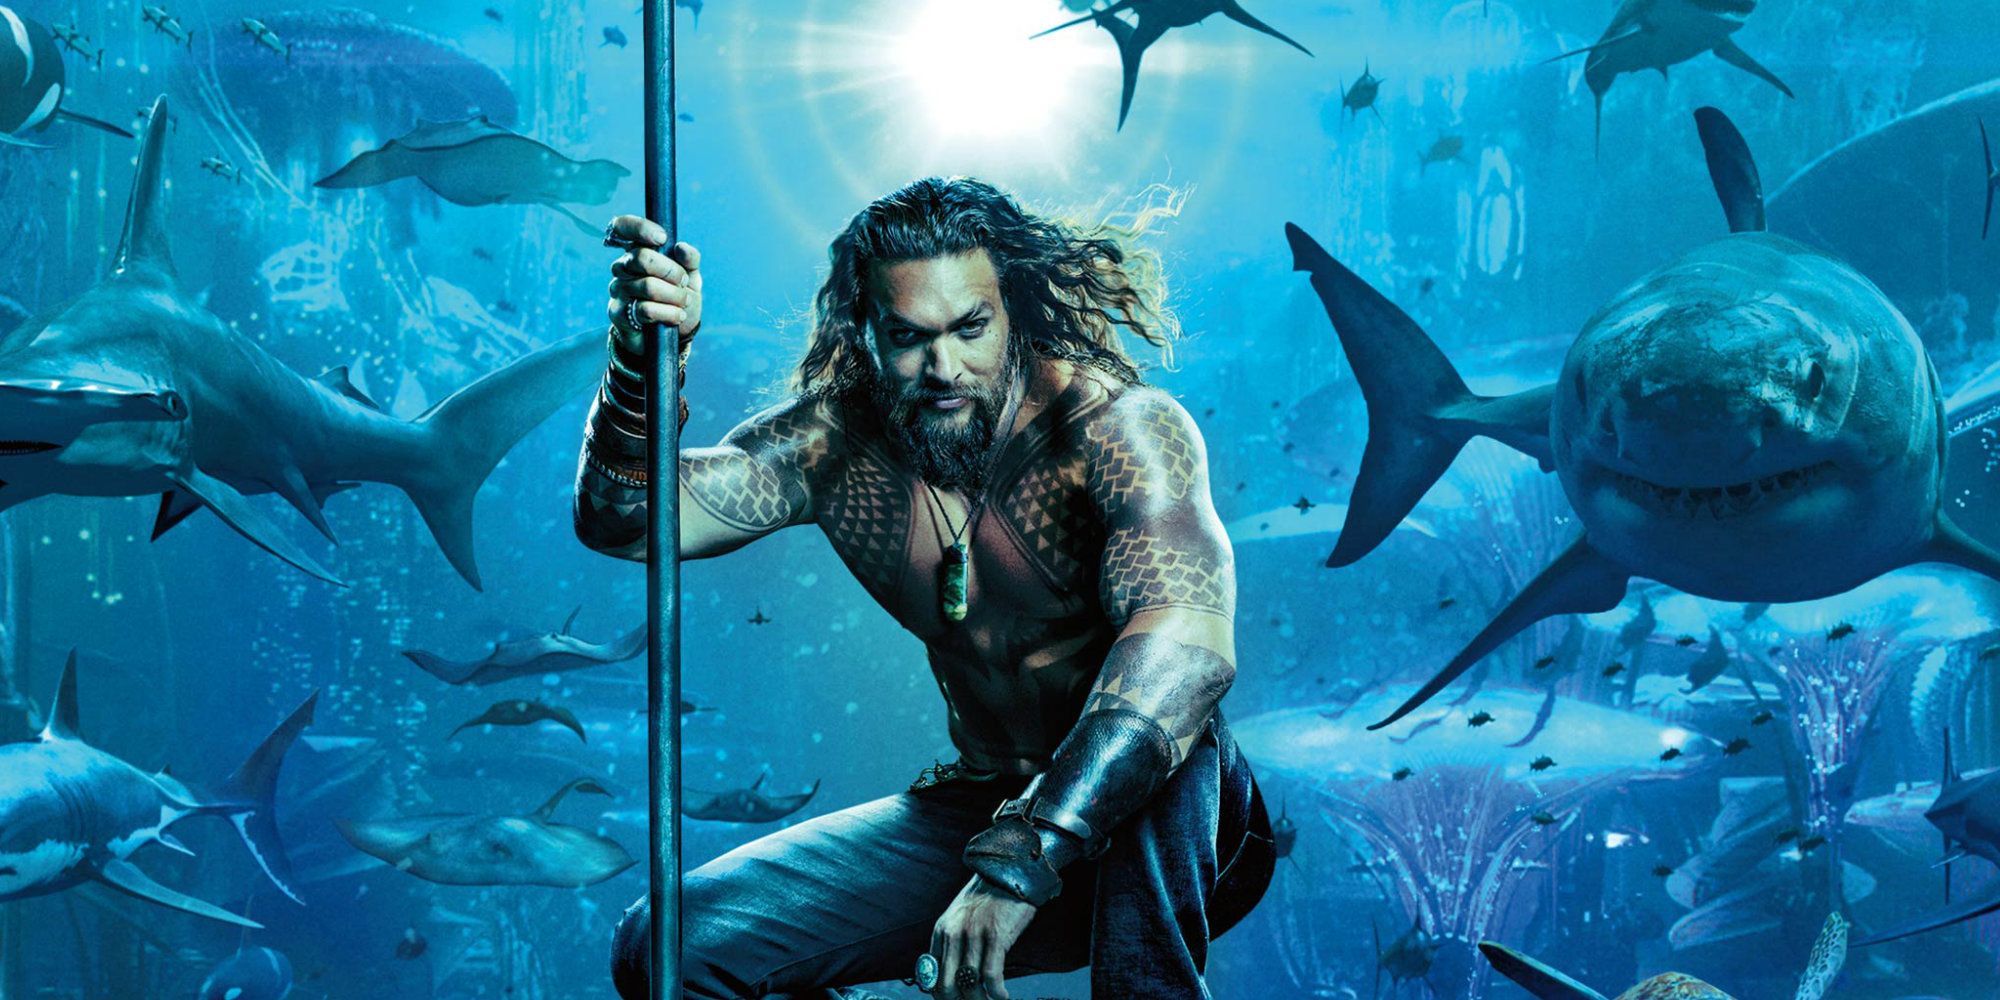 Aquaman Movie Fan Poster Hilariously Names All the Sea Creatures